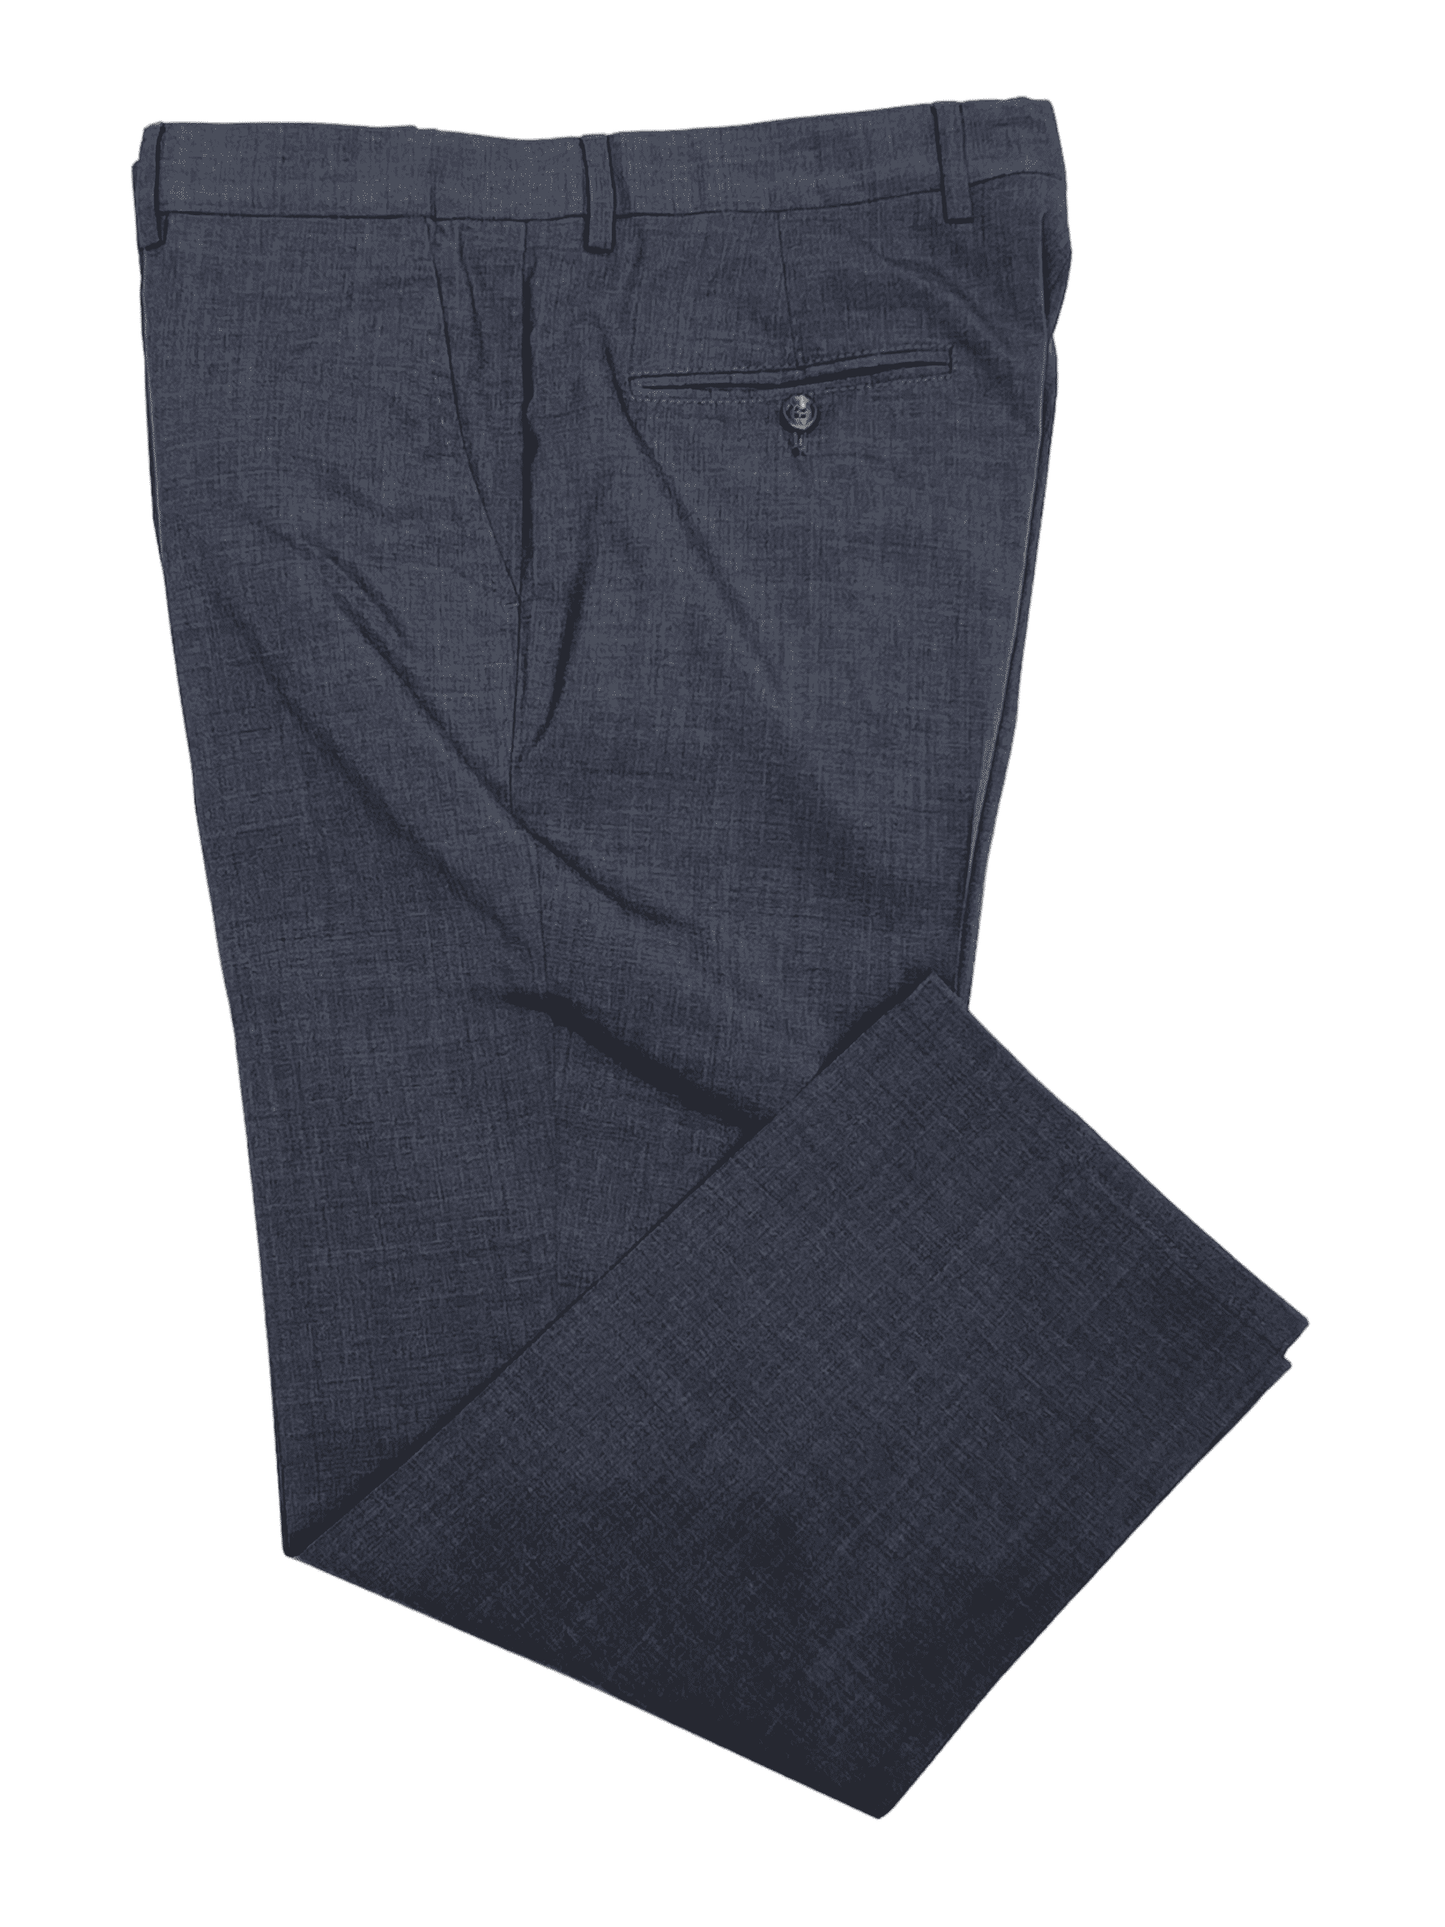 Brunello Cucinelli Charcoal Grey Wool Dress Pant 37W 26L - Genuine Design Luxury Consignment Calgary, Alberta, Canada New and Pre-Owned Clothing, Shoes, Accessories.